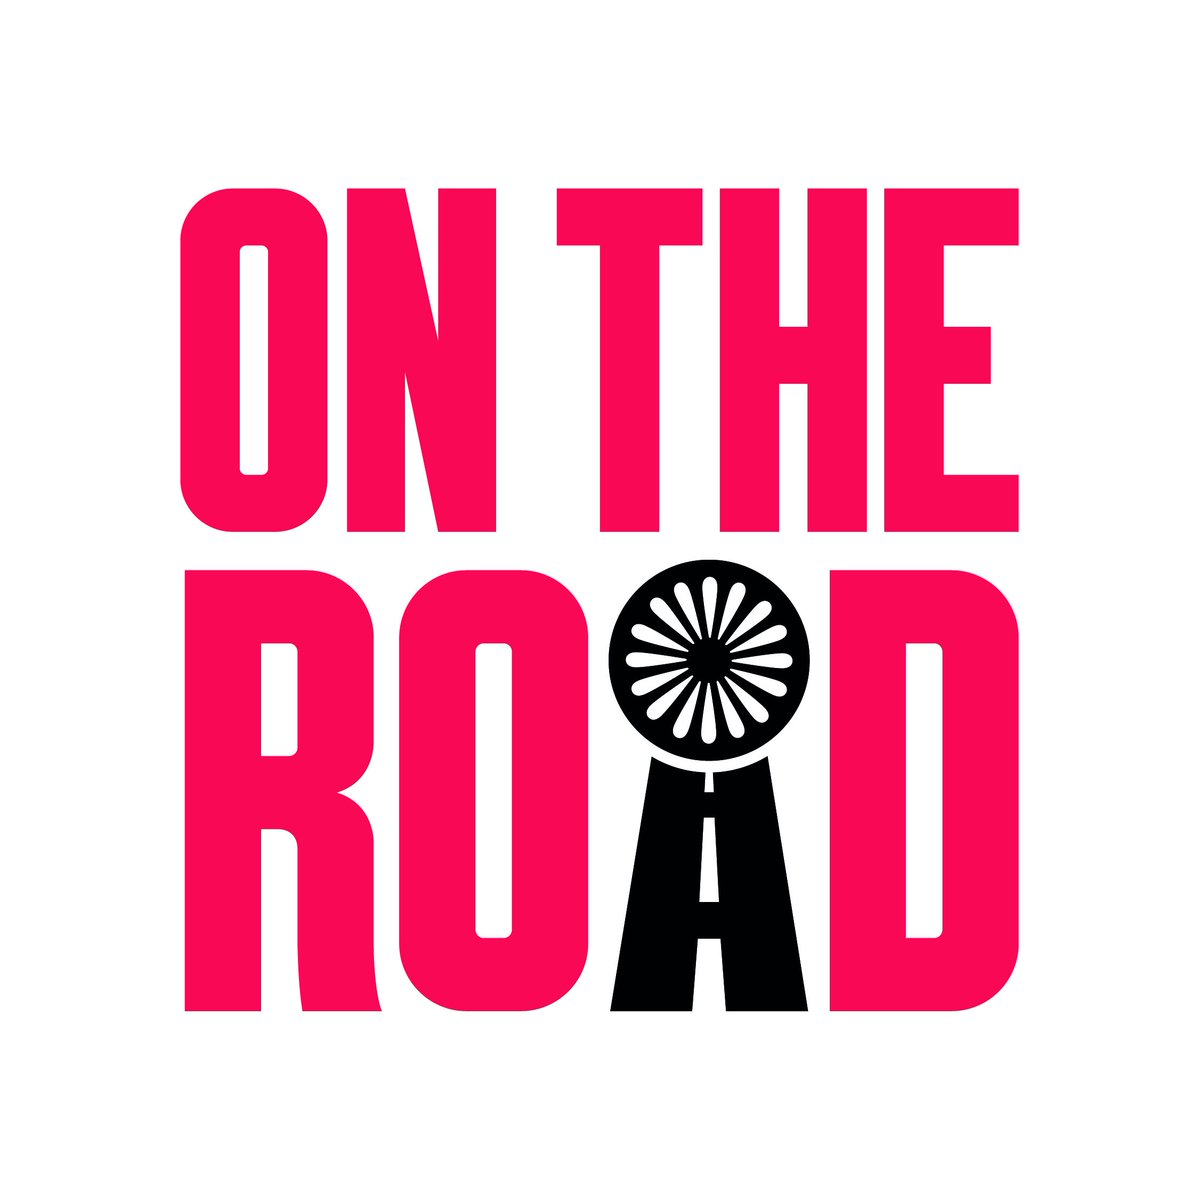 NEW #PODCAST ALERT! Episode 2 of On The Road. Sherrie from @ReportRacismGRT describes the shocking racist hate crimes they encounter, and why it's important to report them safely. #GRT ontheroadradio.libsyn.com/episode-2-the-…